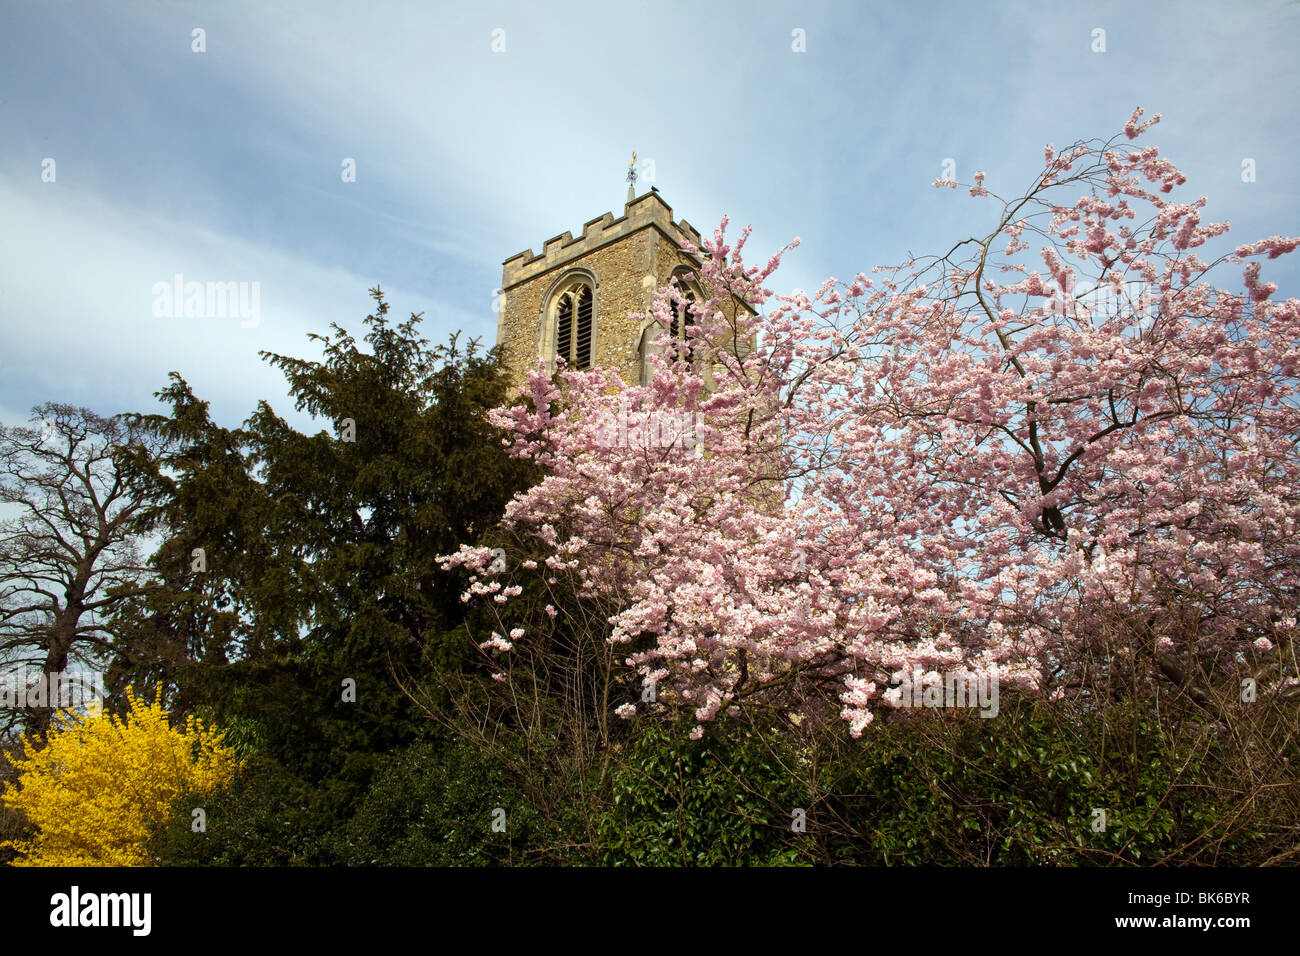 St Mary at Latton parish church in Harlow, Essex photographed with spring blossom. Stock Photo